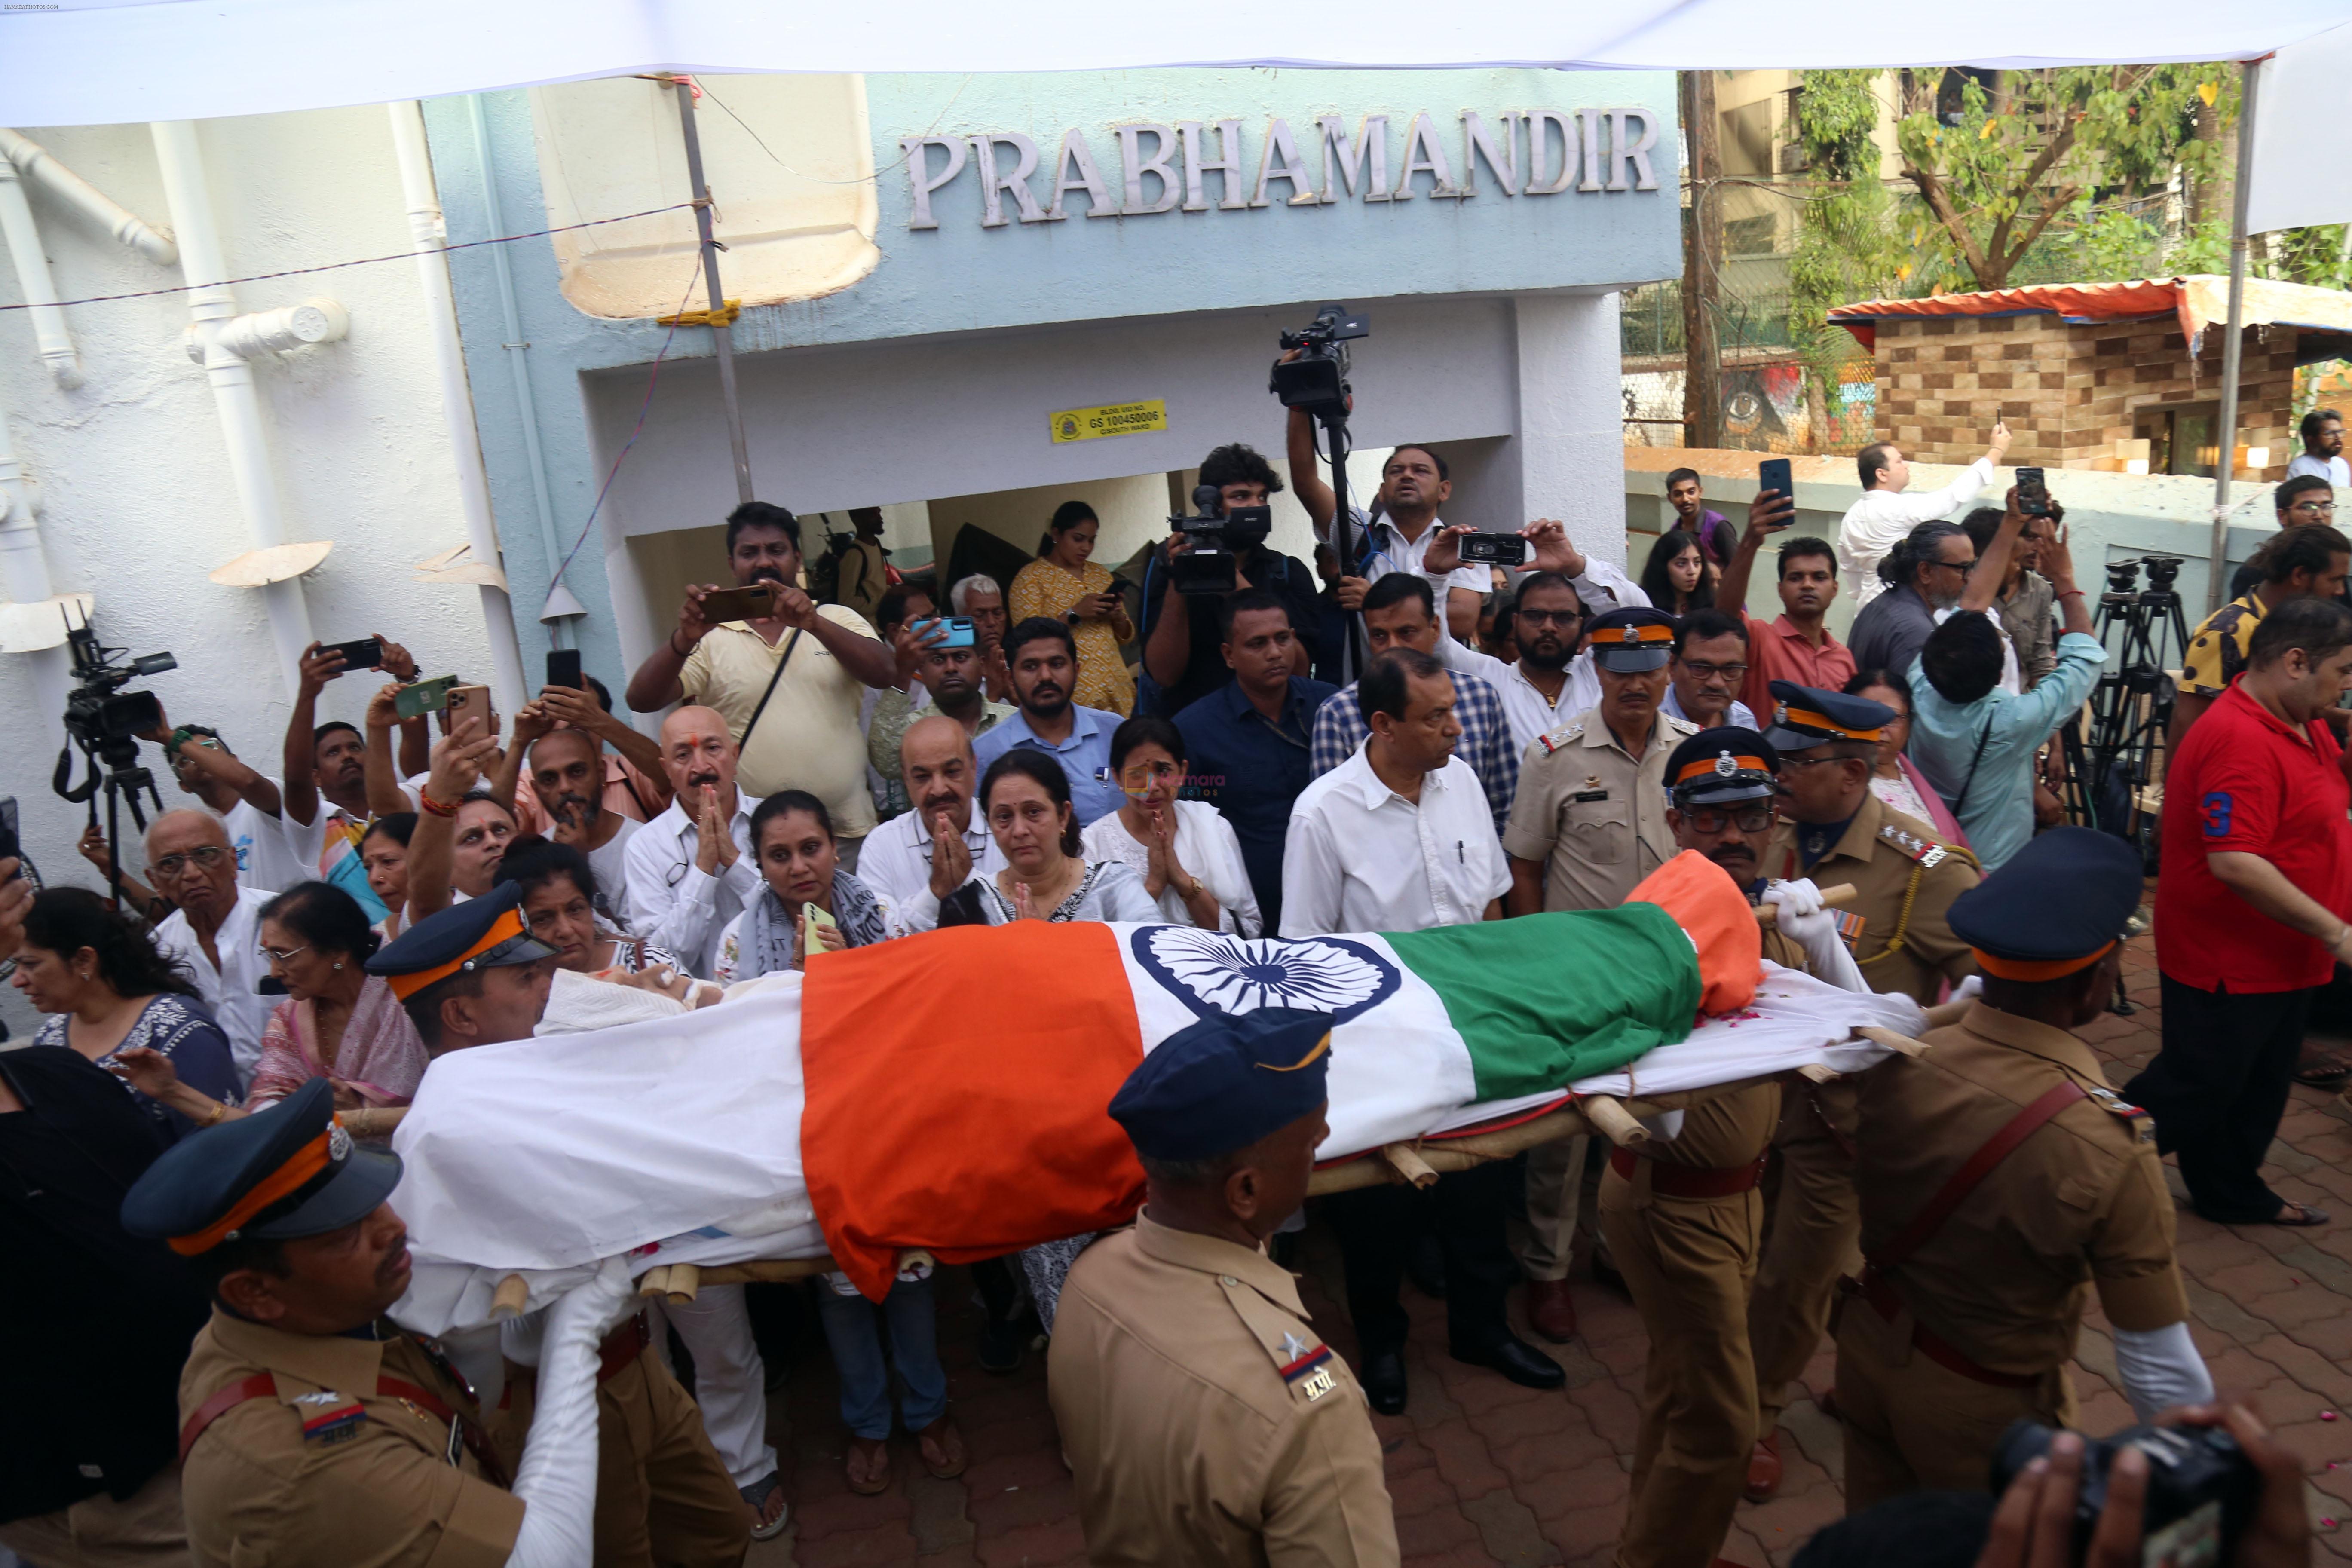 Guests gave final respects Sulochana Latkar at her house